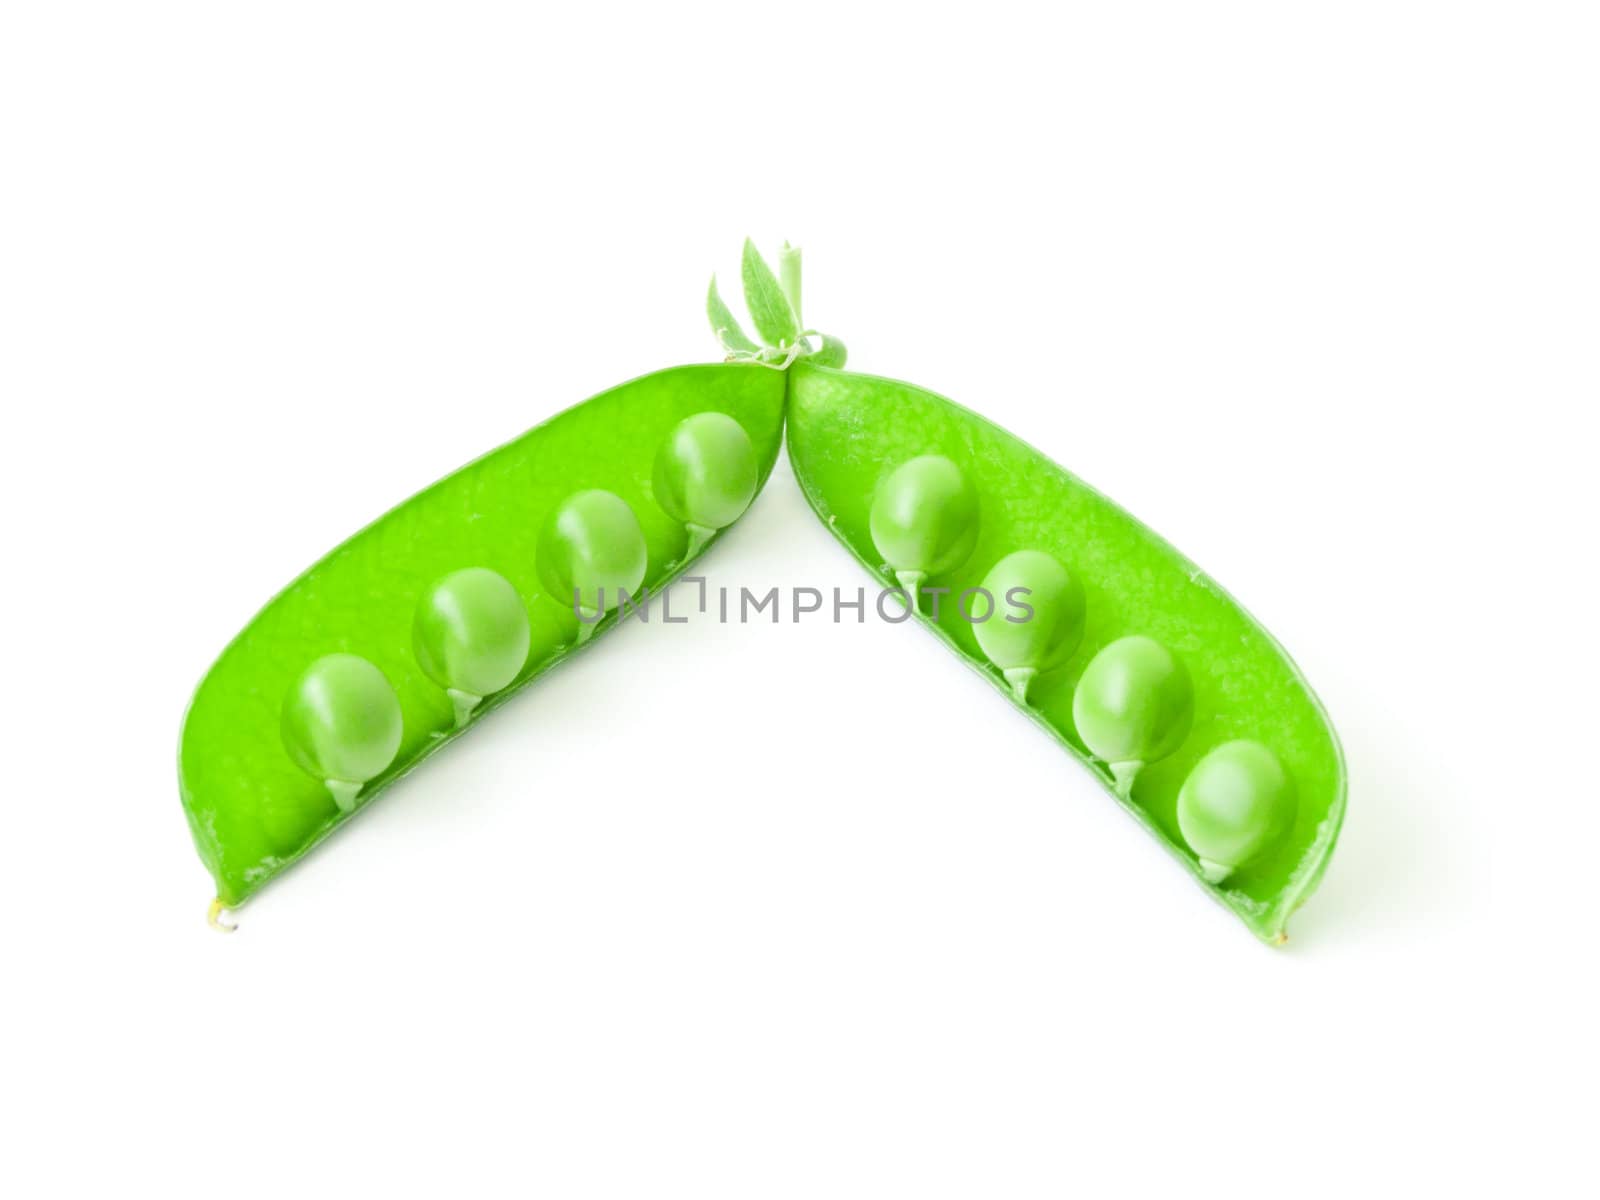 The isolated opened pod of peas on a white background